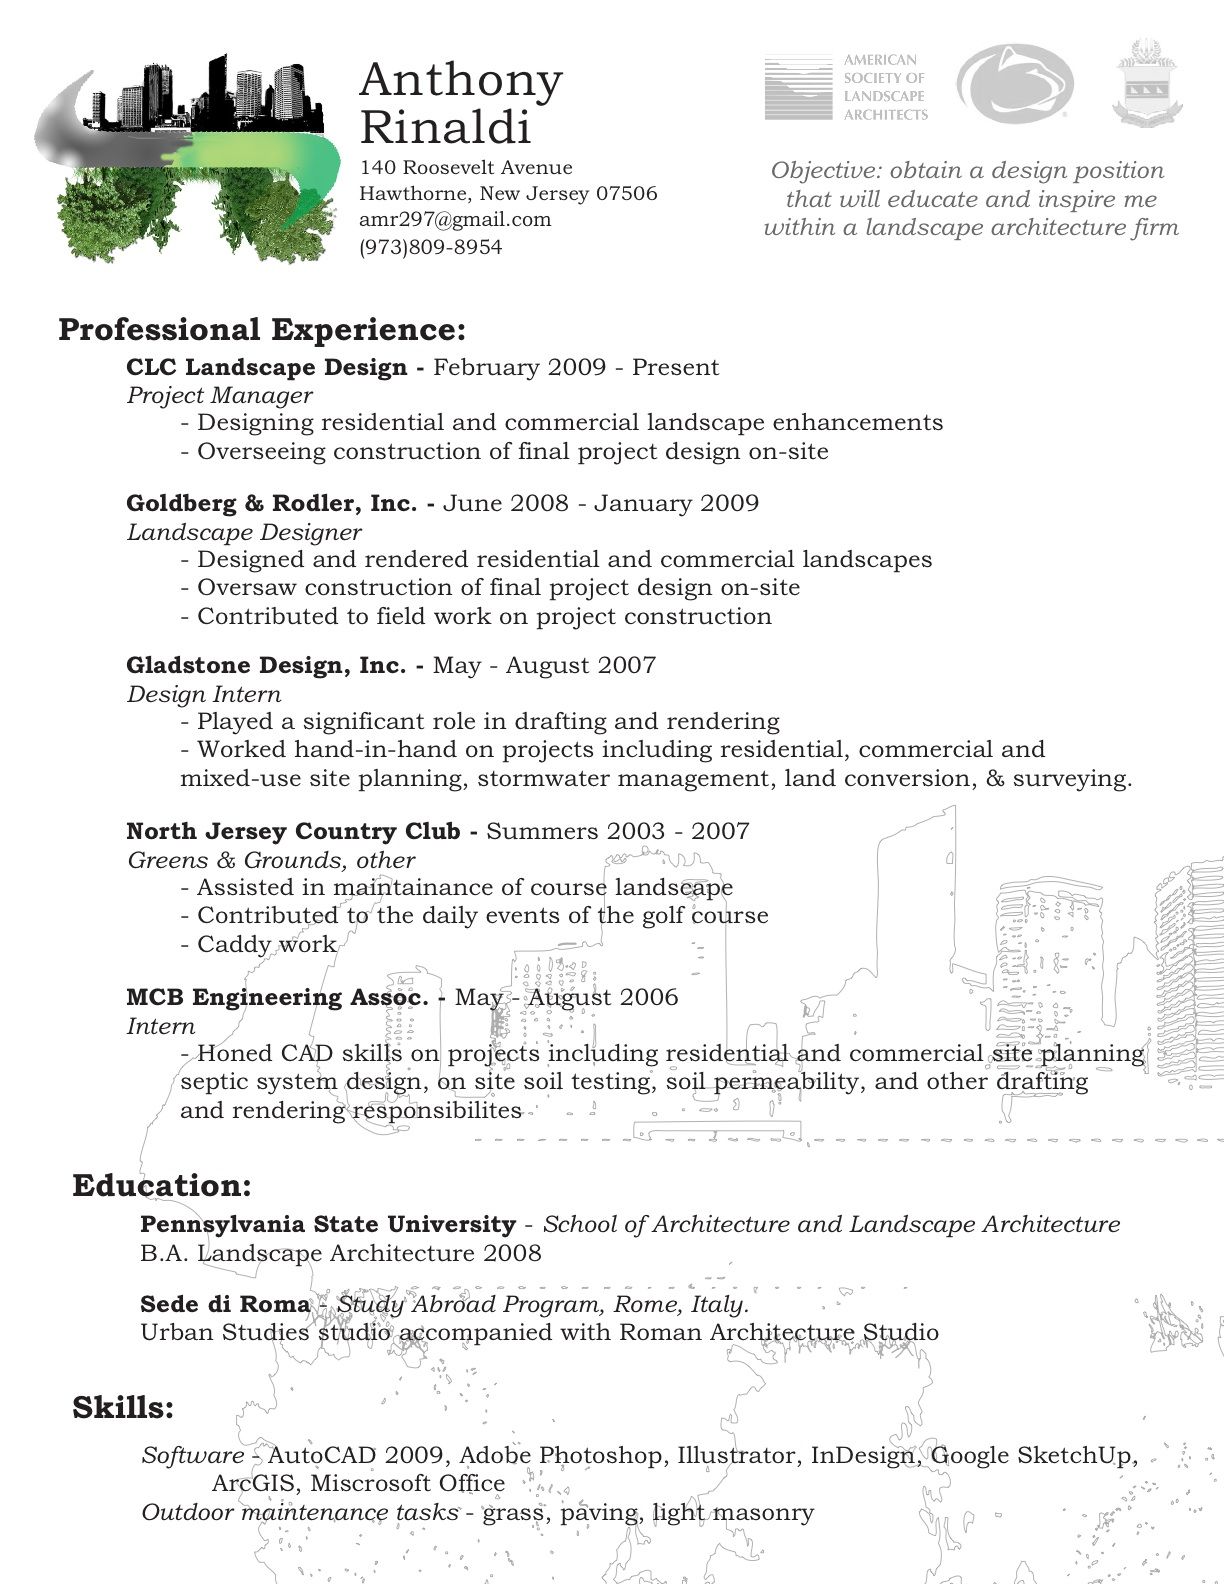 Resume Examples Landscaping 